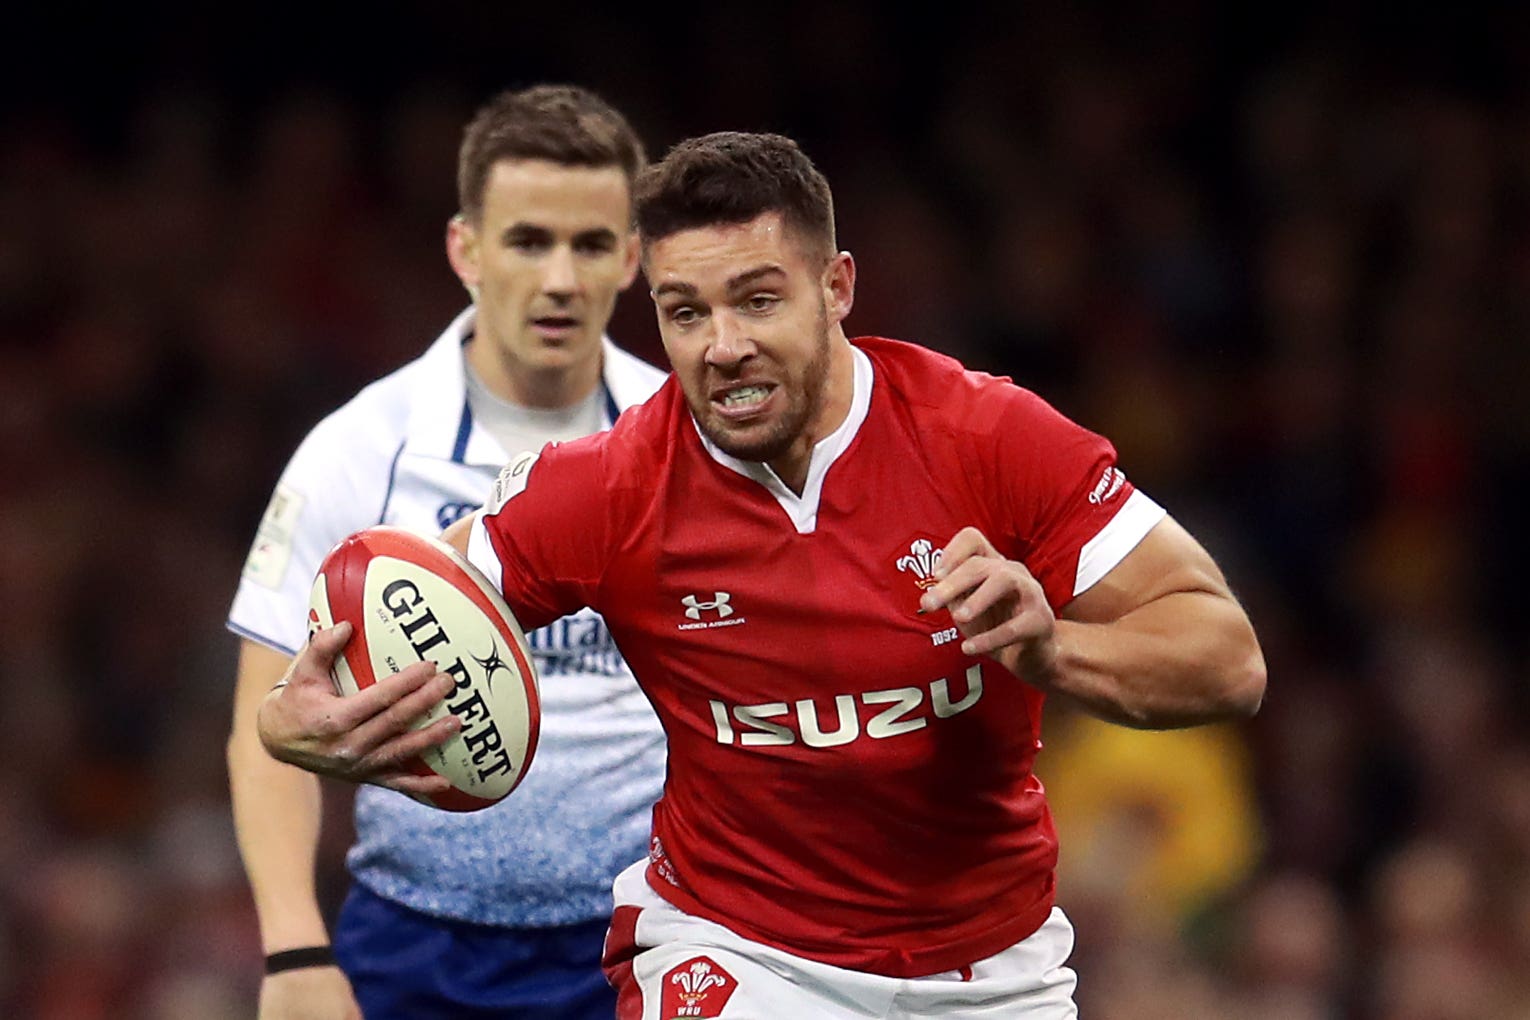 Rhys Webb has announced his retirement from international rugby